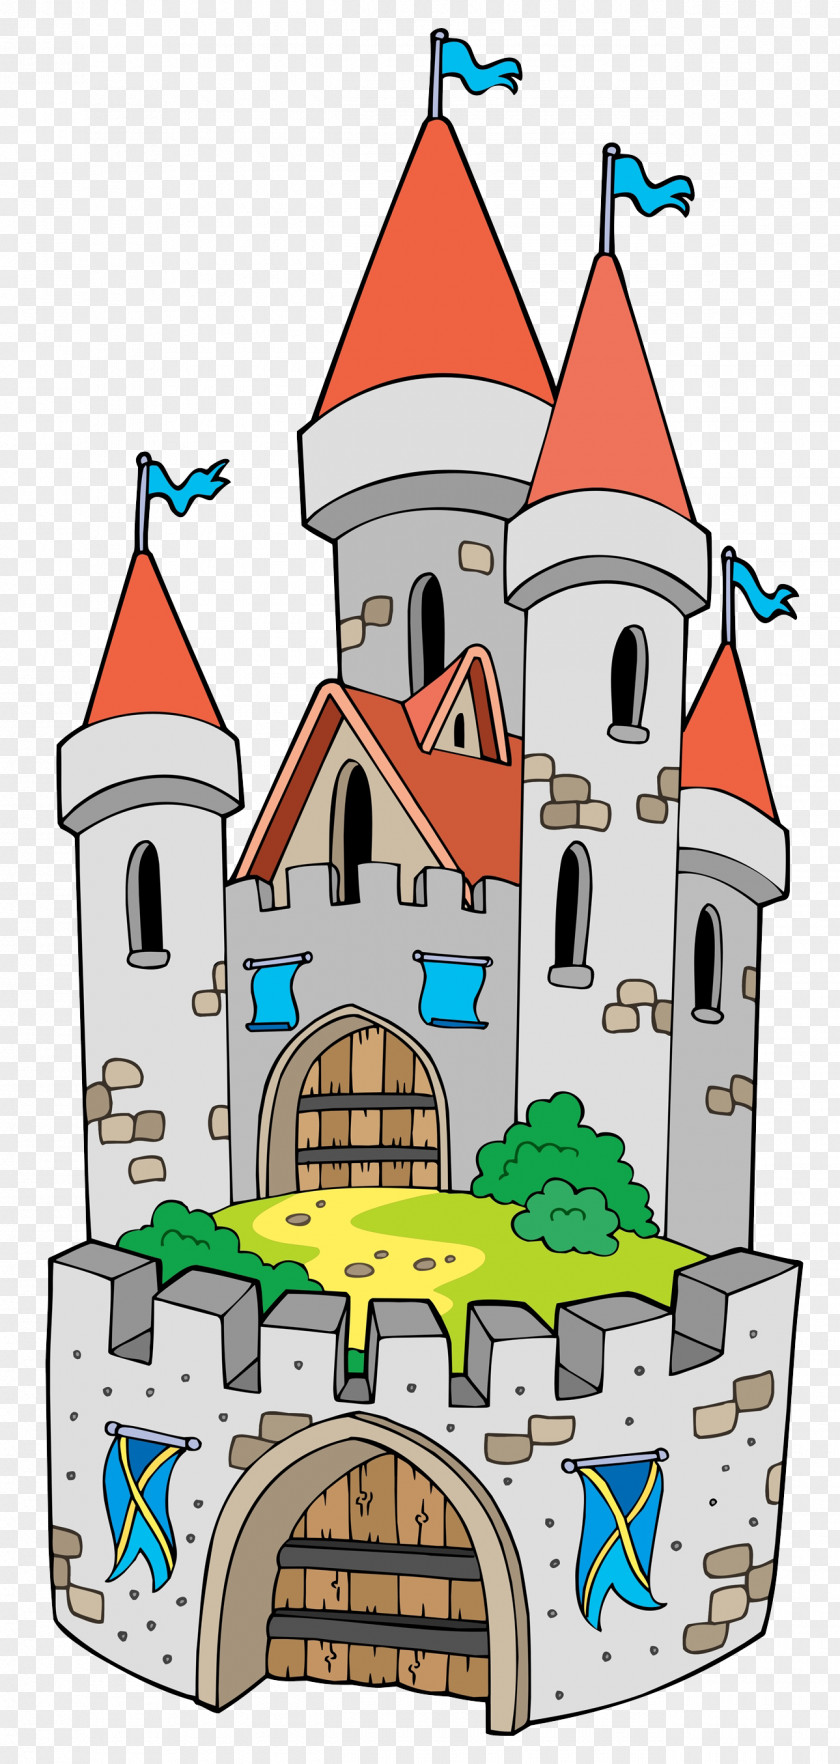 The Tower Above Blue Flag Castle Cartoon Fortification Clip Art PNG